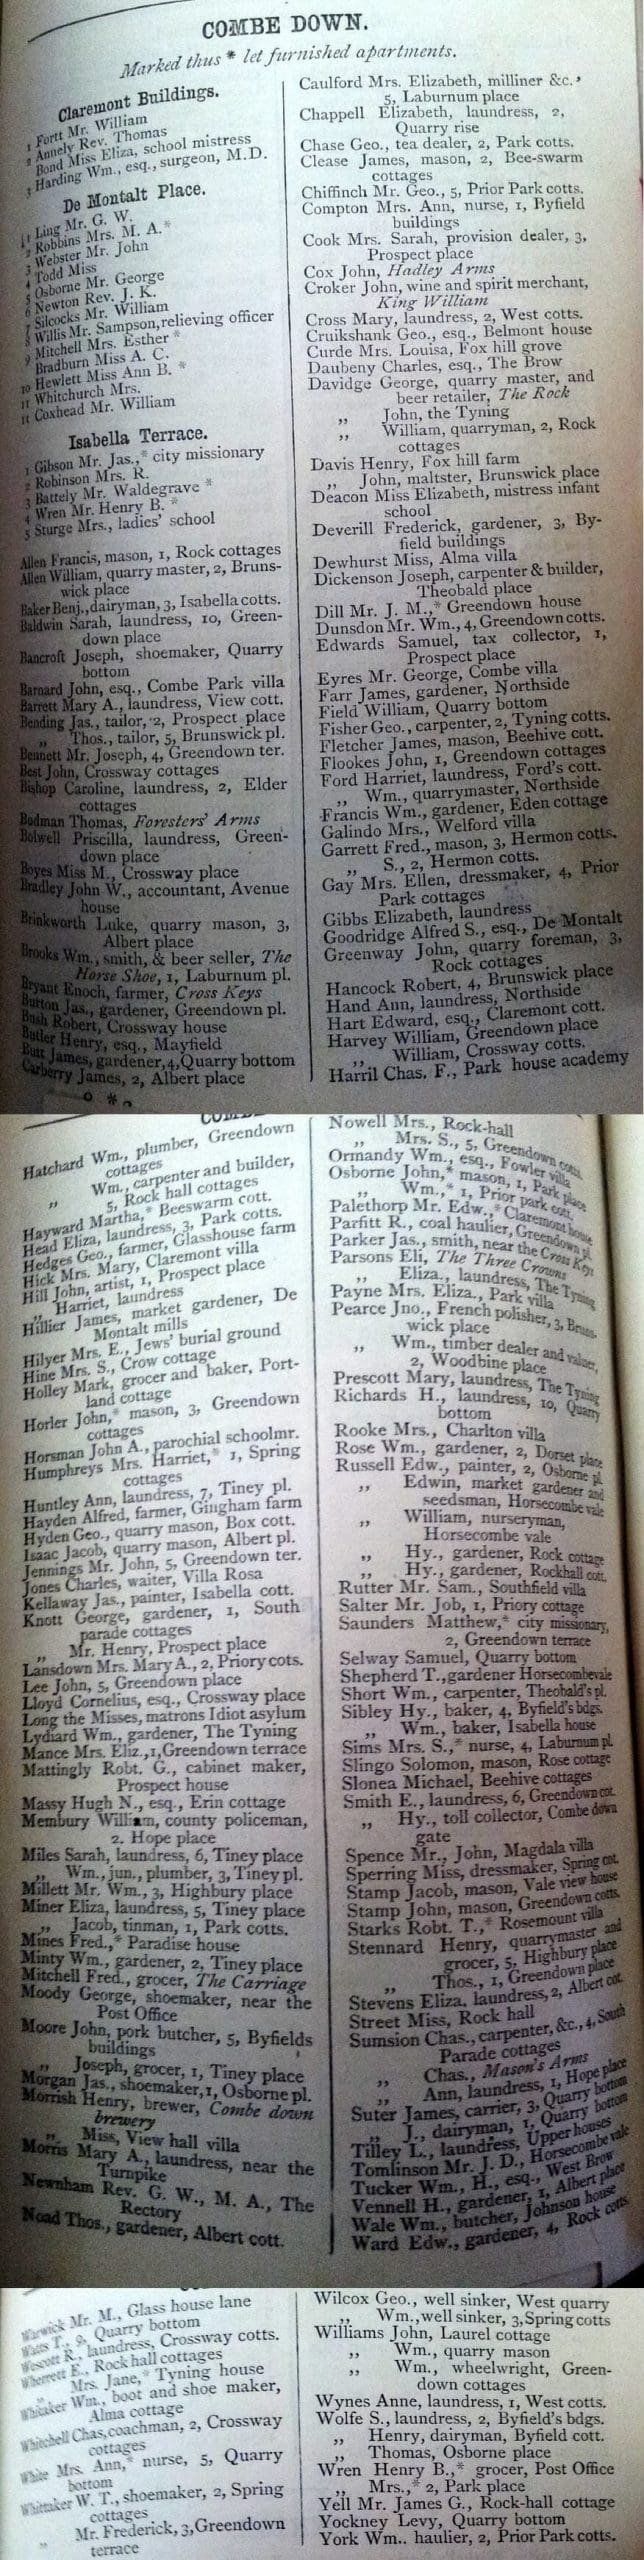 1870 Post Office Directory for Combe Down